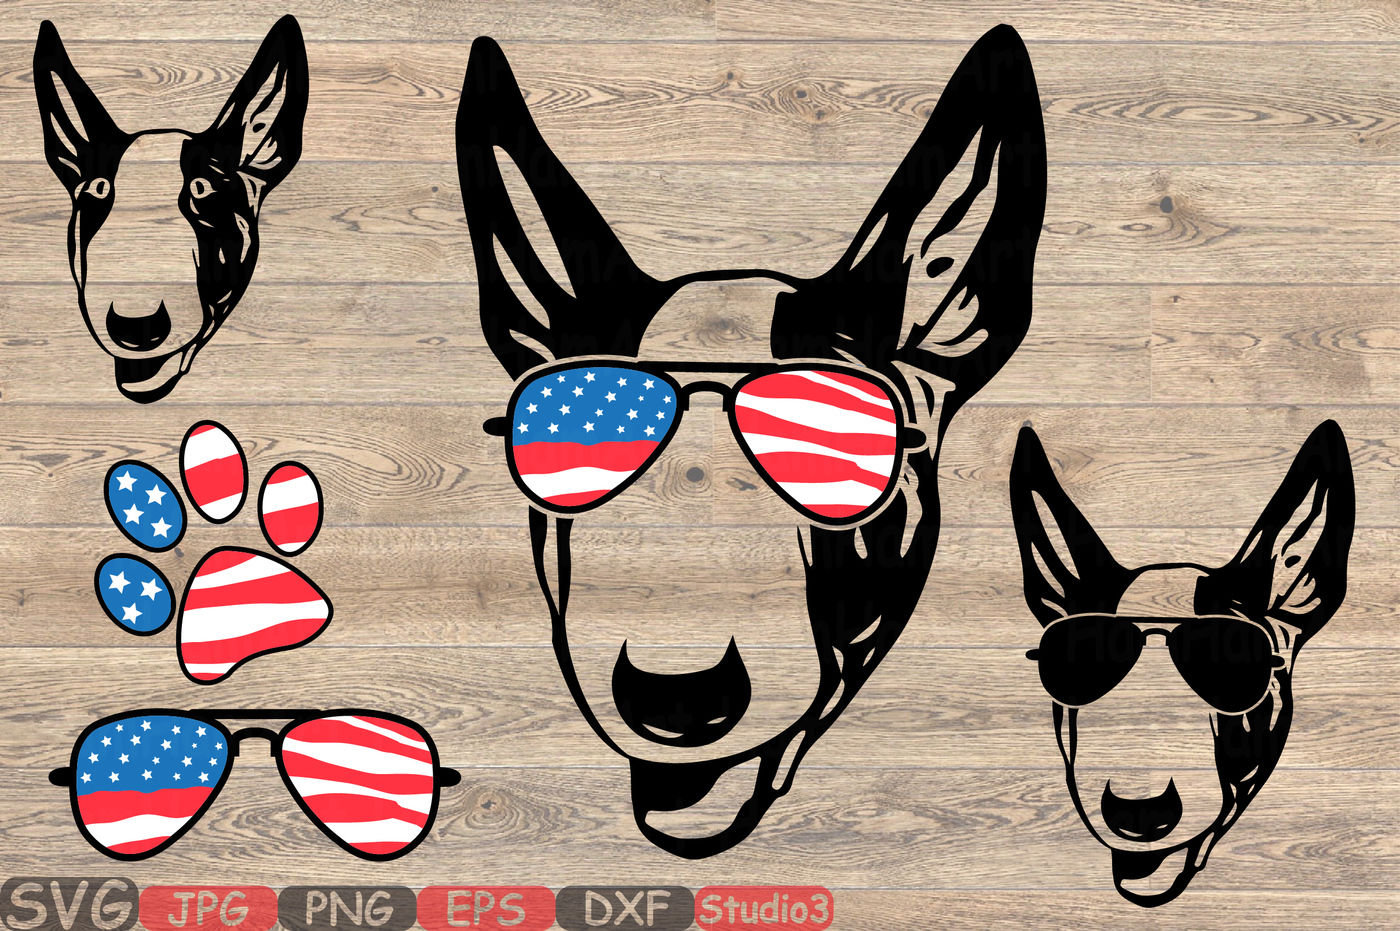 Bull Terrier Dog Usa Flag Glasses Paw Silhouette Svg 4th July 862s By Hamhamart Thehungryjpeg Com